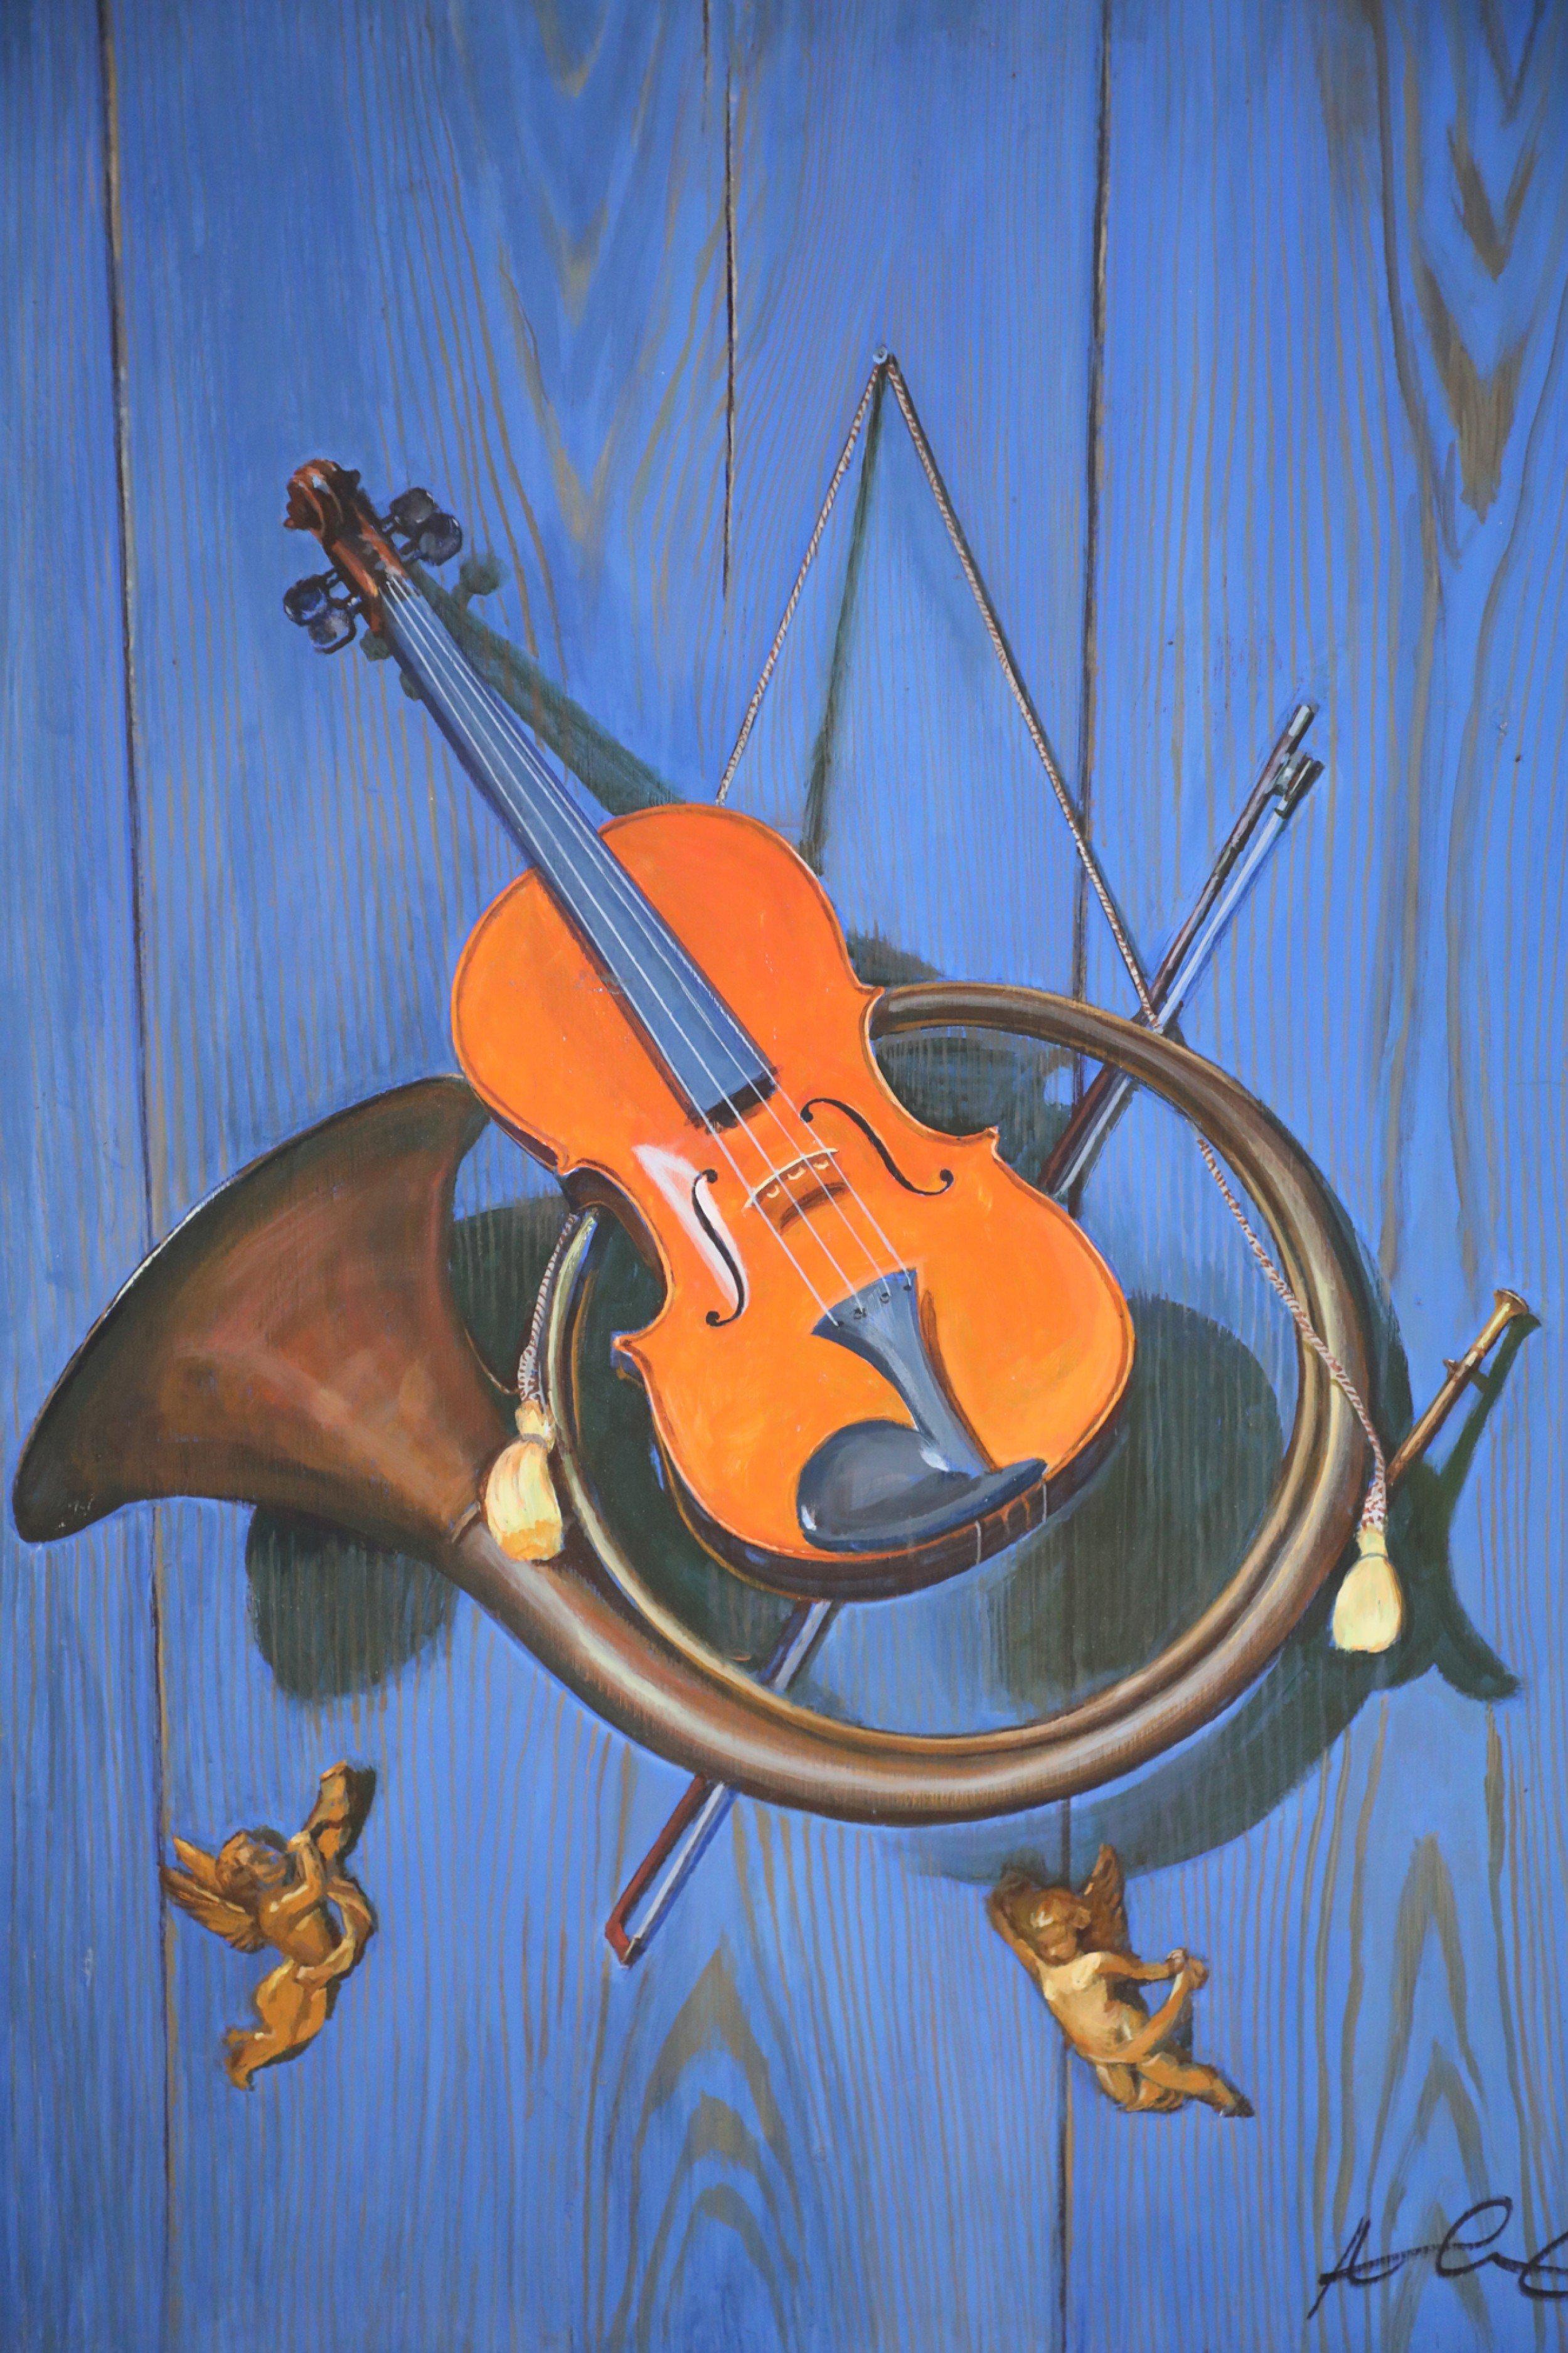 Vintage (20th century) acrylic still life of a brass horn and violin hanging on a blue woodgrain wall with tassels and two golden cherubs, painted on rectangular plywood.
       